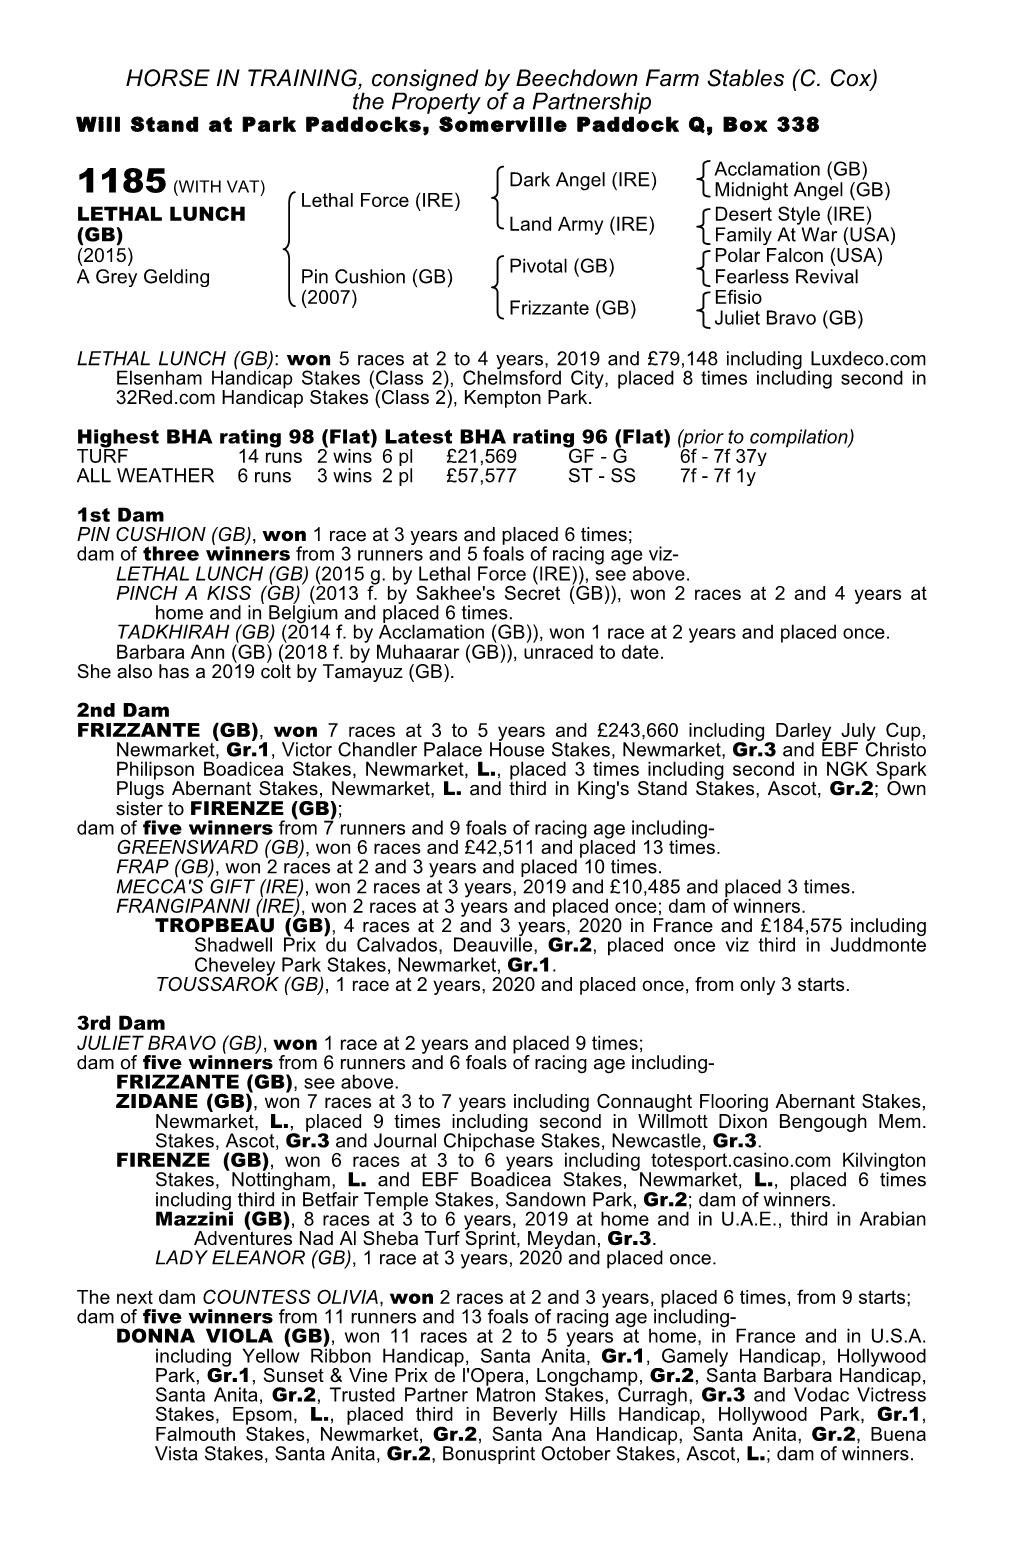 HORSE in TRAINING, Consigned by Beechdown Farm Stables (C. Cox) the Property of a Partnership Will Stand at Park Paddocks, Somerville Paddock Q, Box 338